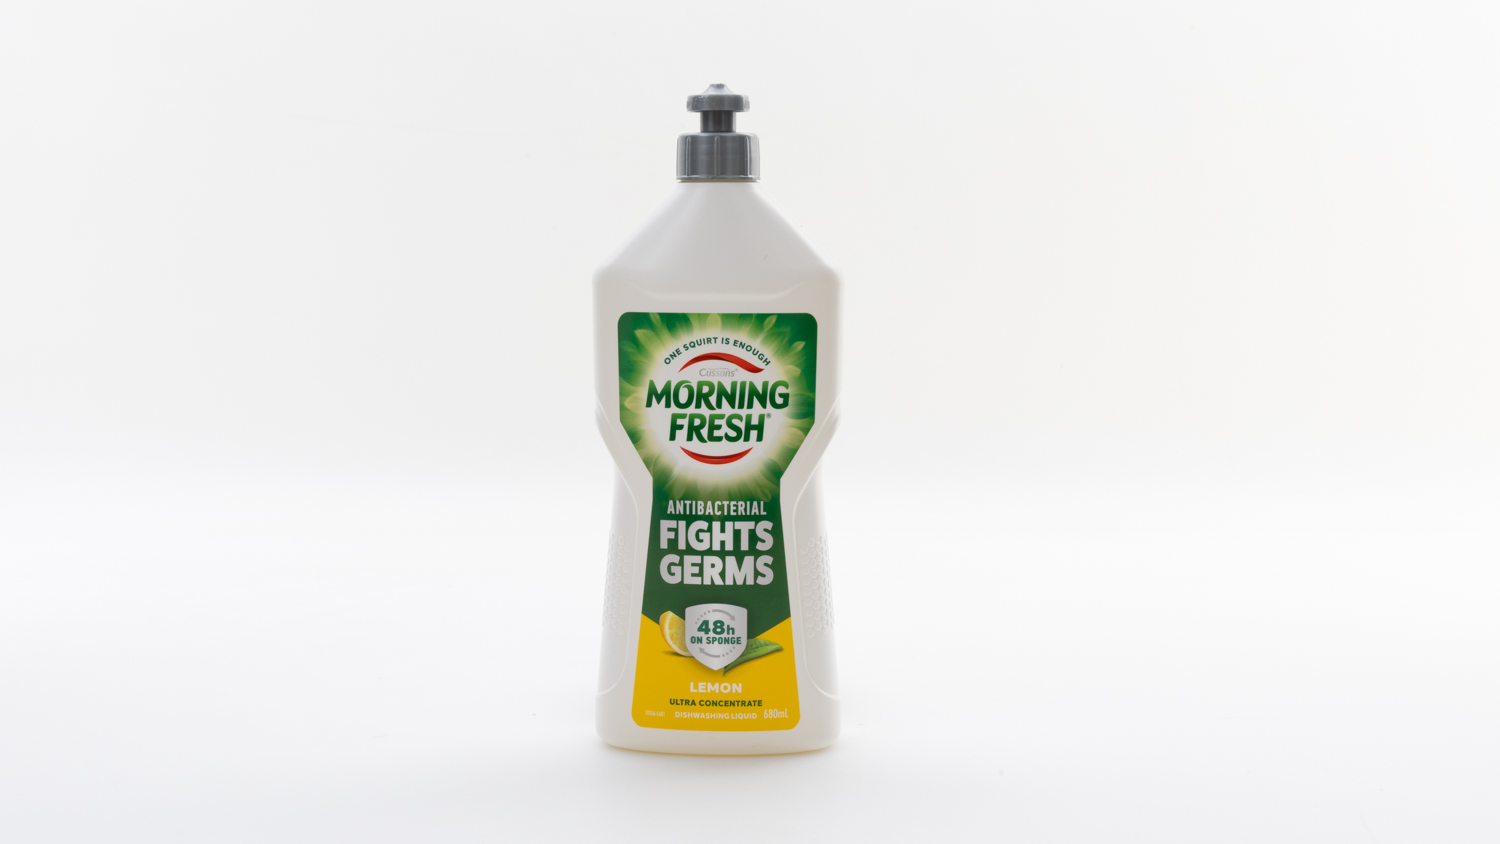 Morning Fresh Antibacterial Fights Germs Lemon Ultra Concentrate Dishwashing Liquid carousel image